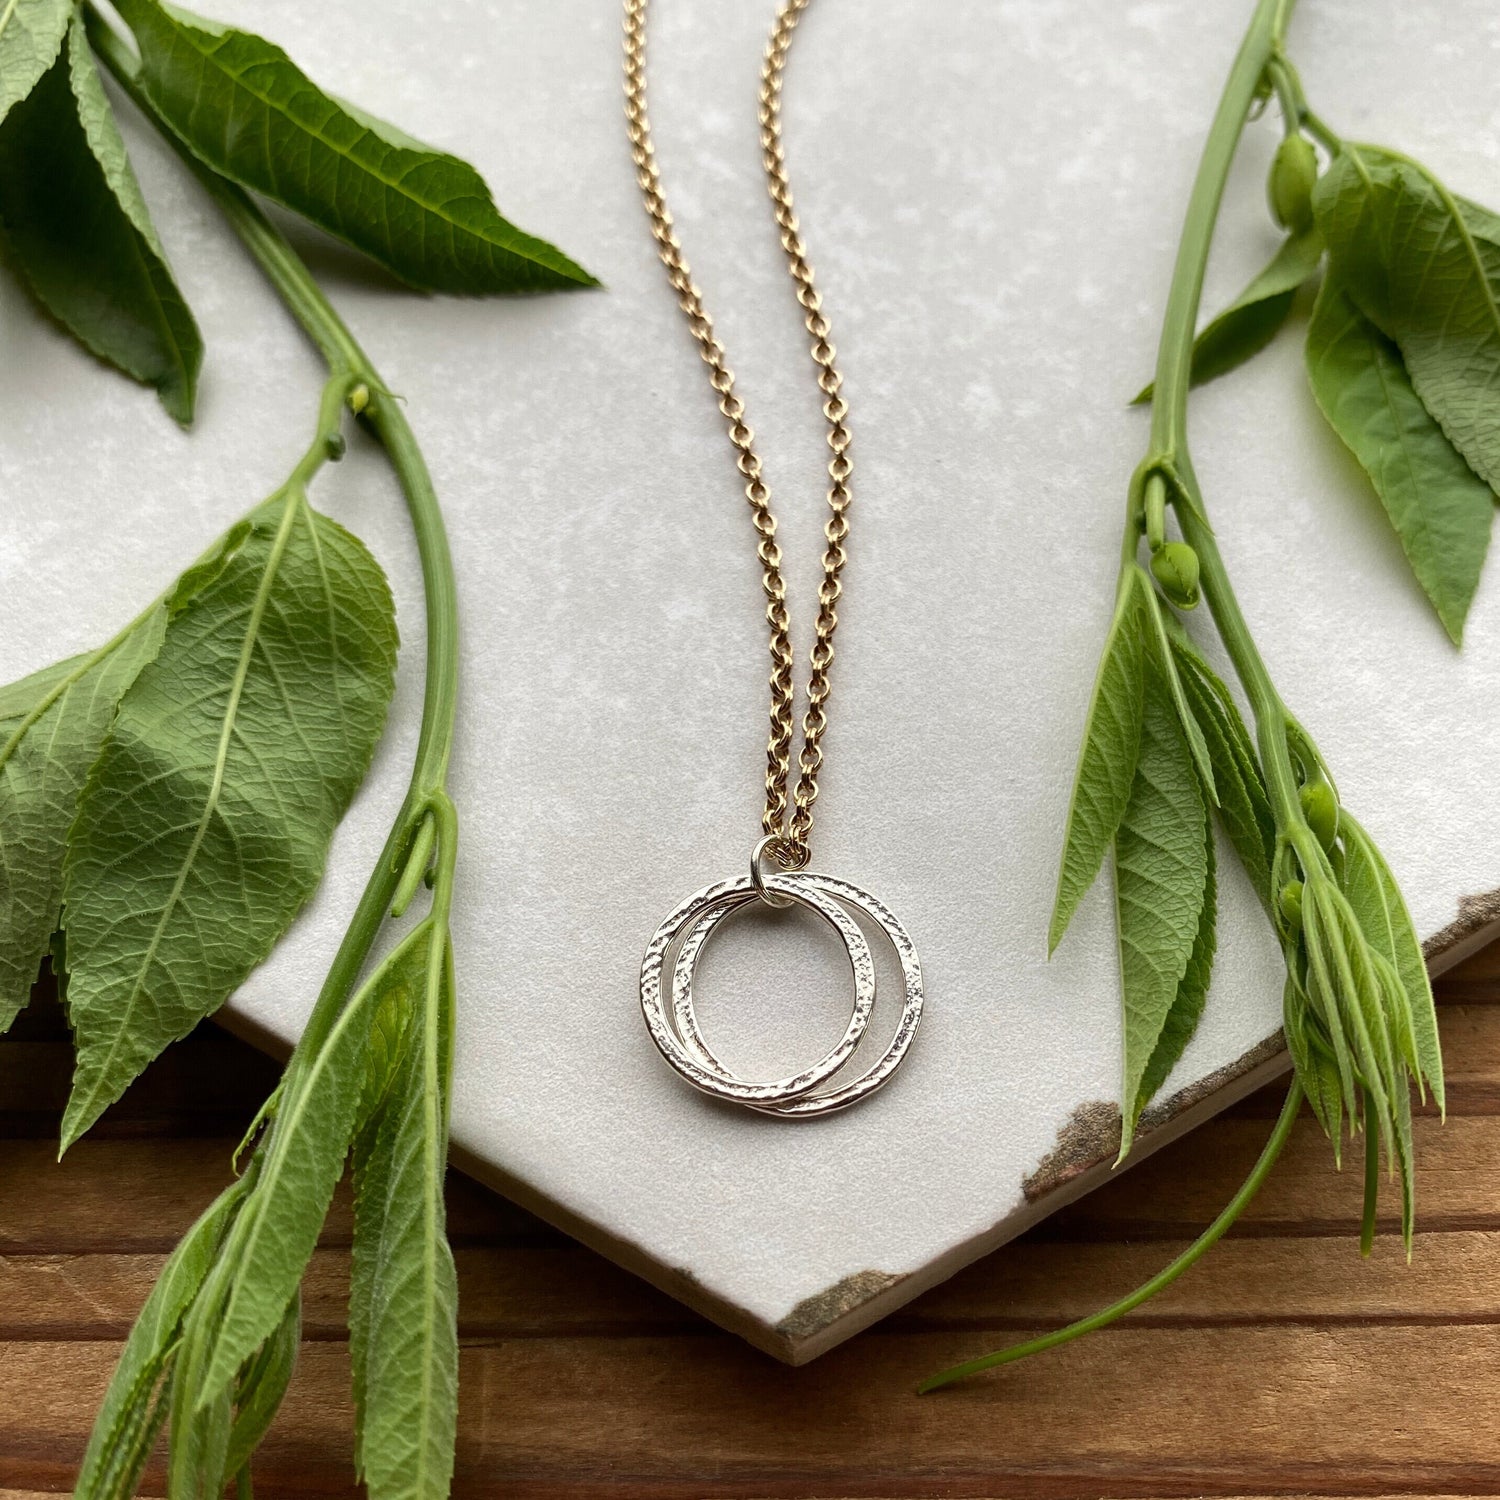 Handcrafted 20th Birthday Minimalist Mixed Metal Milestone Layered Two Circle Necklace, Perfectly Imperfect 2 Rings for 2 Decades